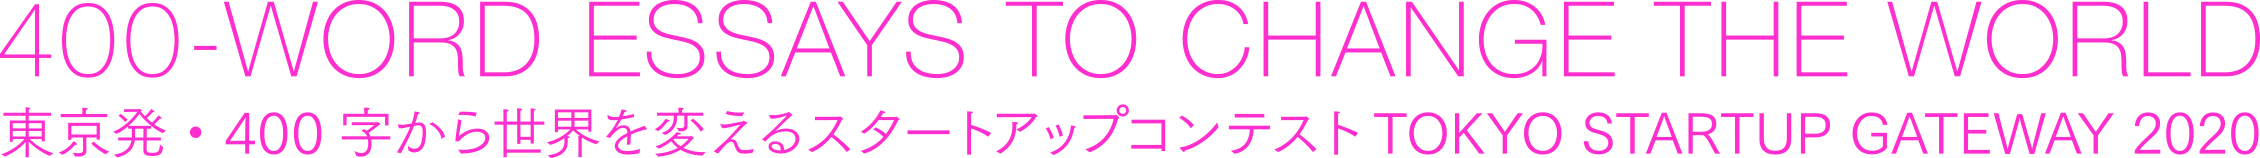 400-WORD ESSAYS TO CHANGE THE WORLD. 東京発・400字から世界を変えるスタートアップコンテストTOKYO STARTUP GATEWAY 2020